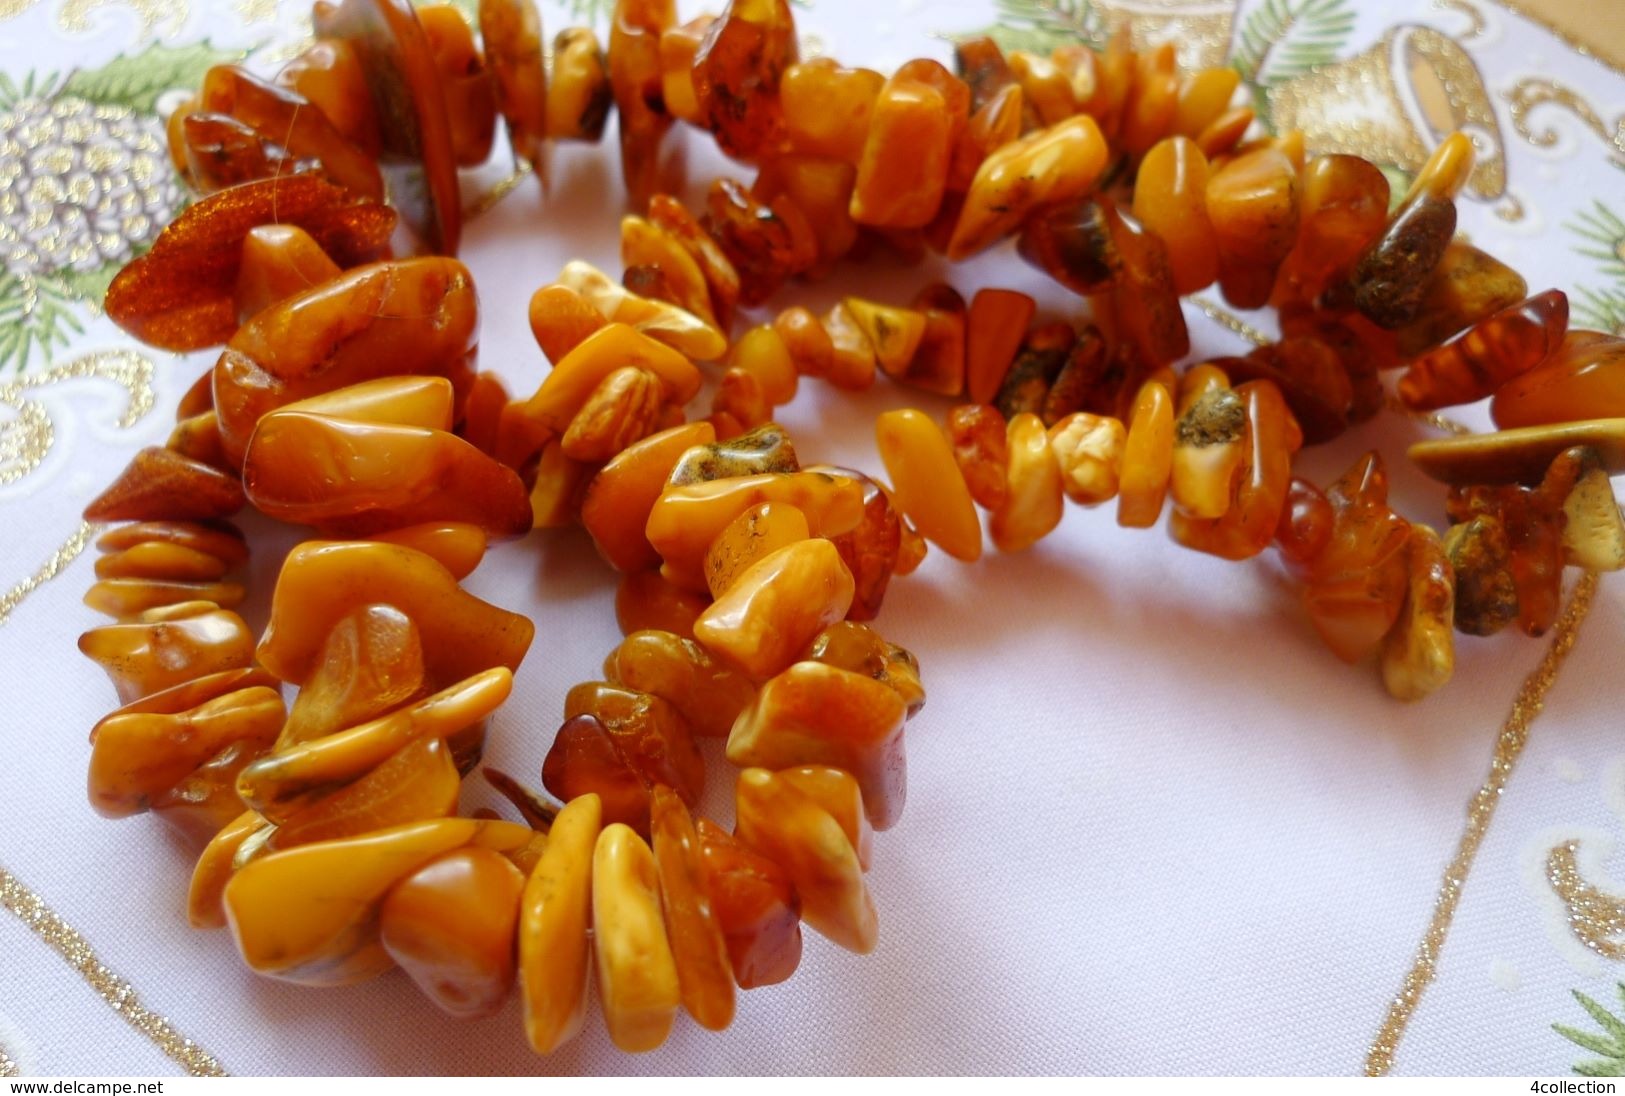 Vintage jewelry Medicine Charm Big Beads Necklace with antique Baltic Amber Yolk Yellow butterscotch - 114g